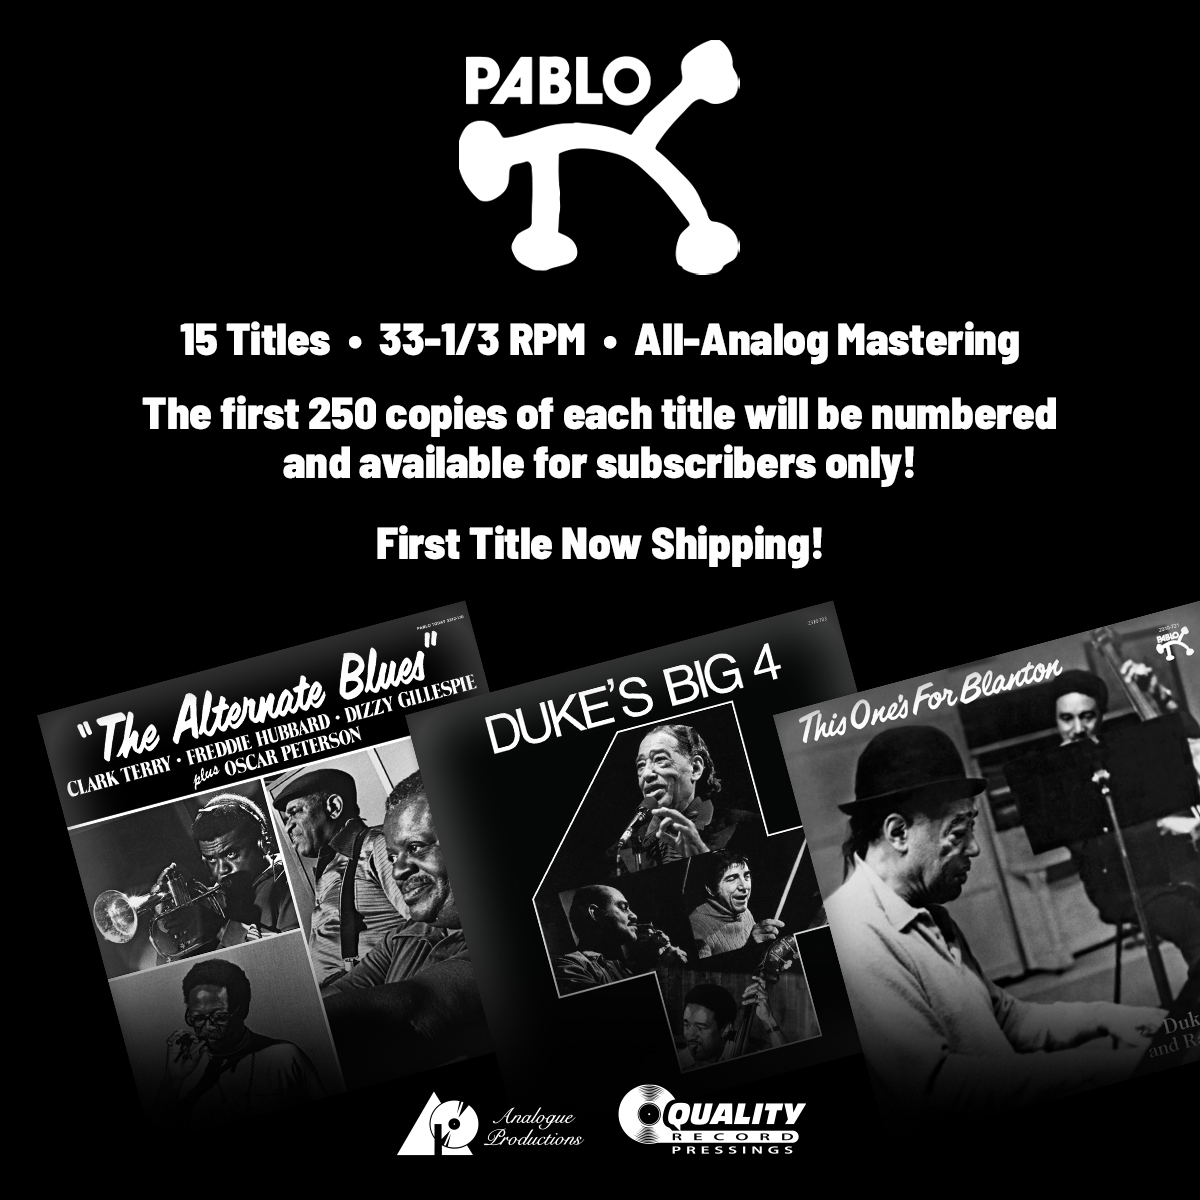 Announcing — A new reissue series featuring the Pablo label! Pablo featured recordings by Ella Fitzgerald, Oscar Peterson, and Joe Pass. Later, Milt Jackson, Count Basie and Paulinho da Costa. See more: tinyurl.com/3z97kfsy